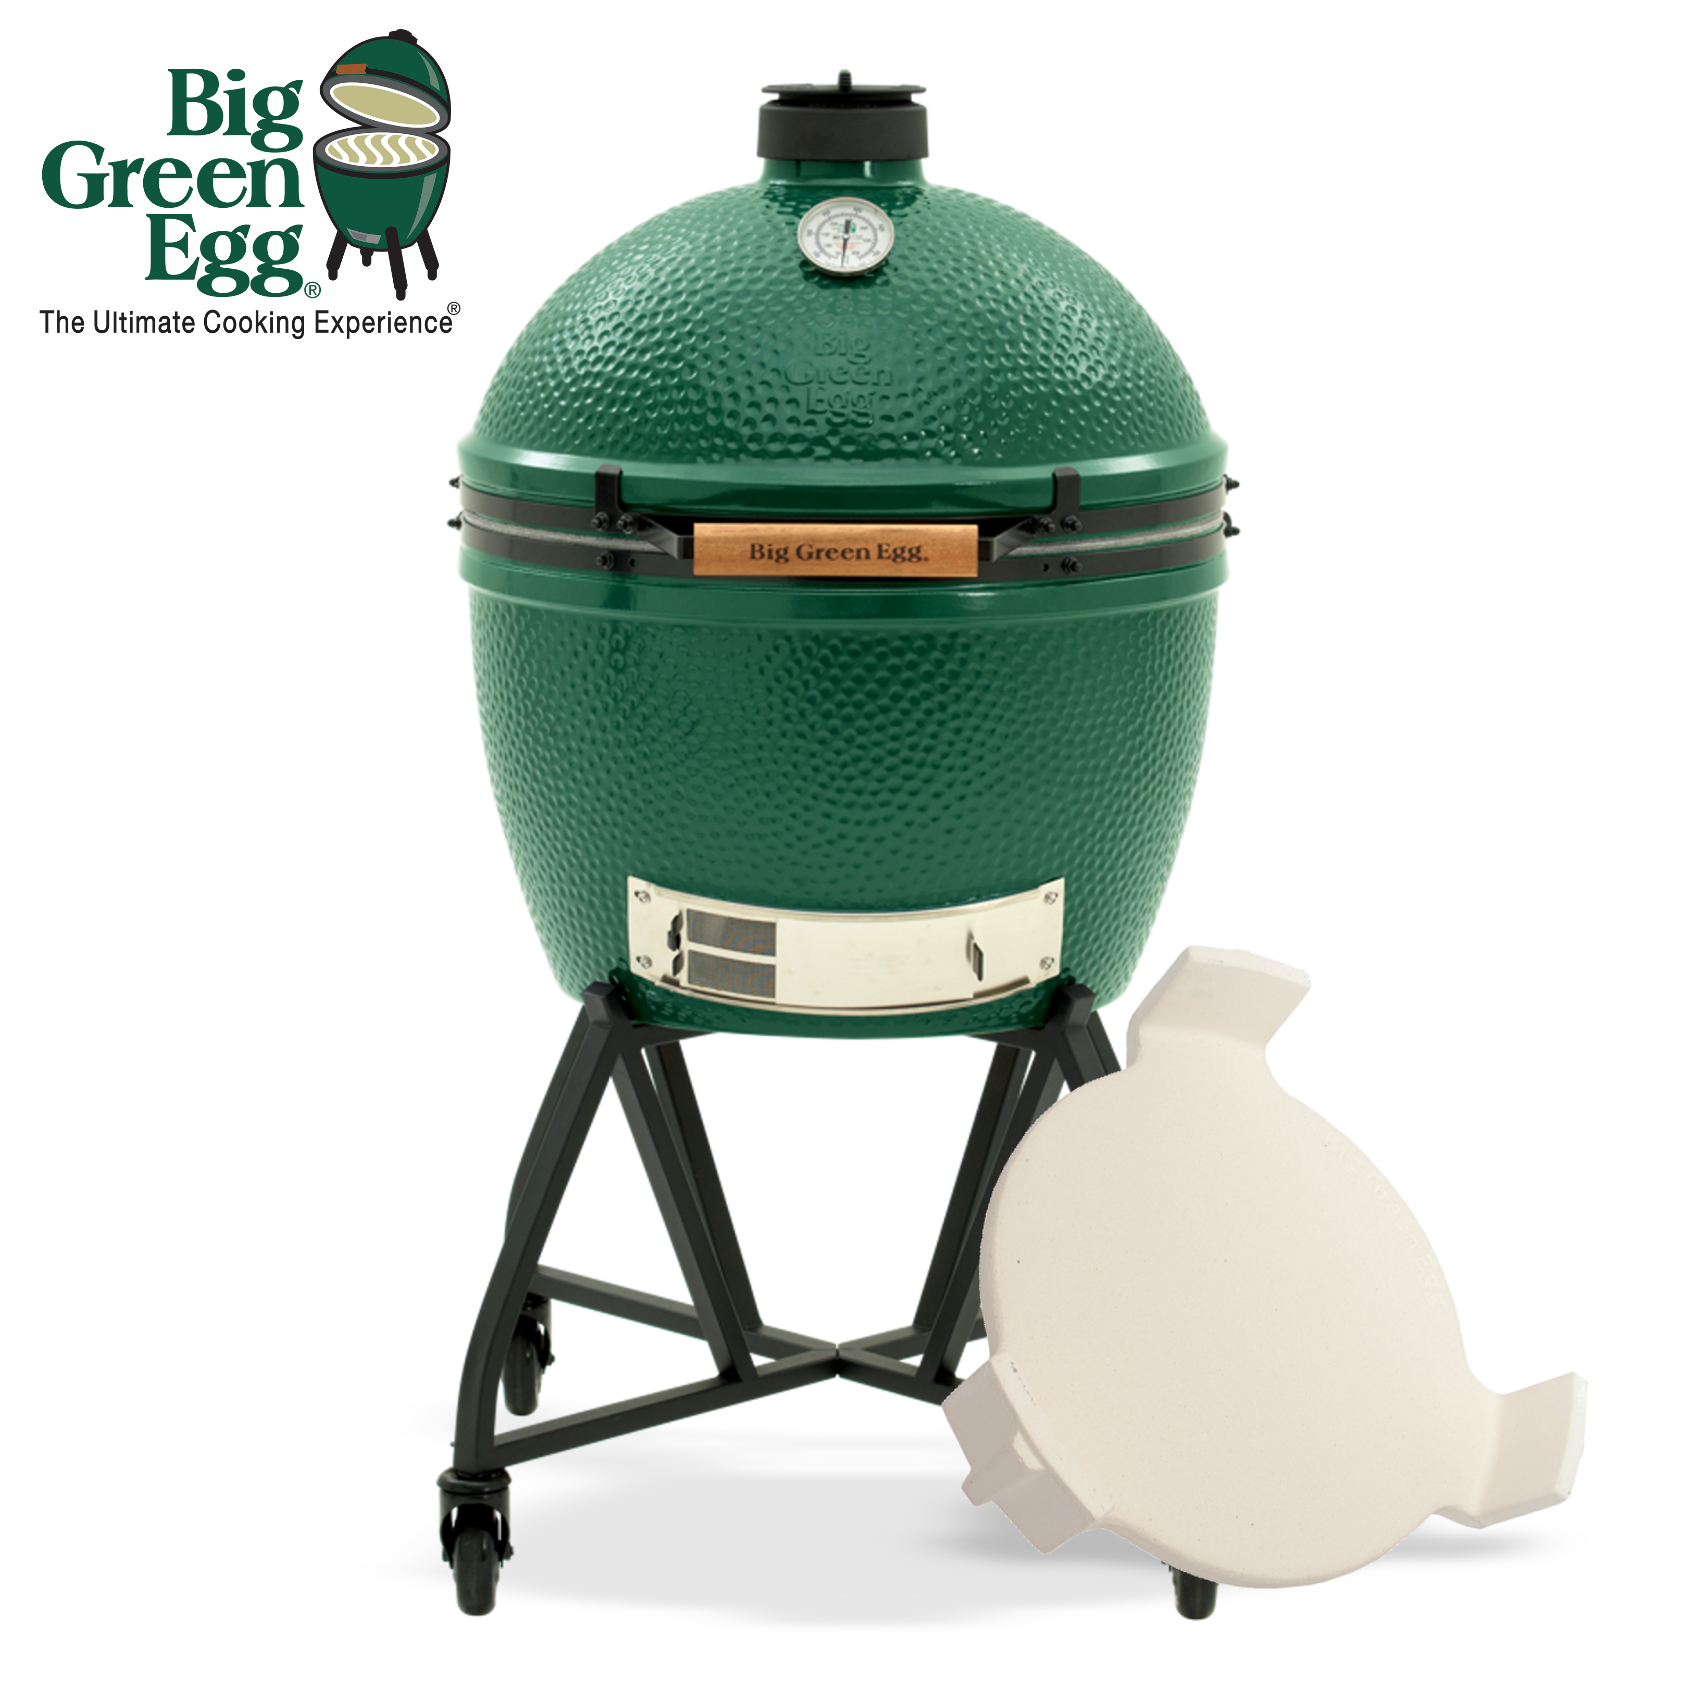 Big Green Egg package pricing